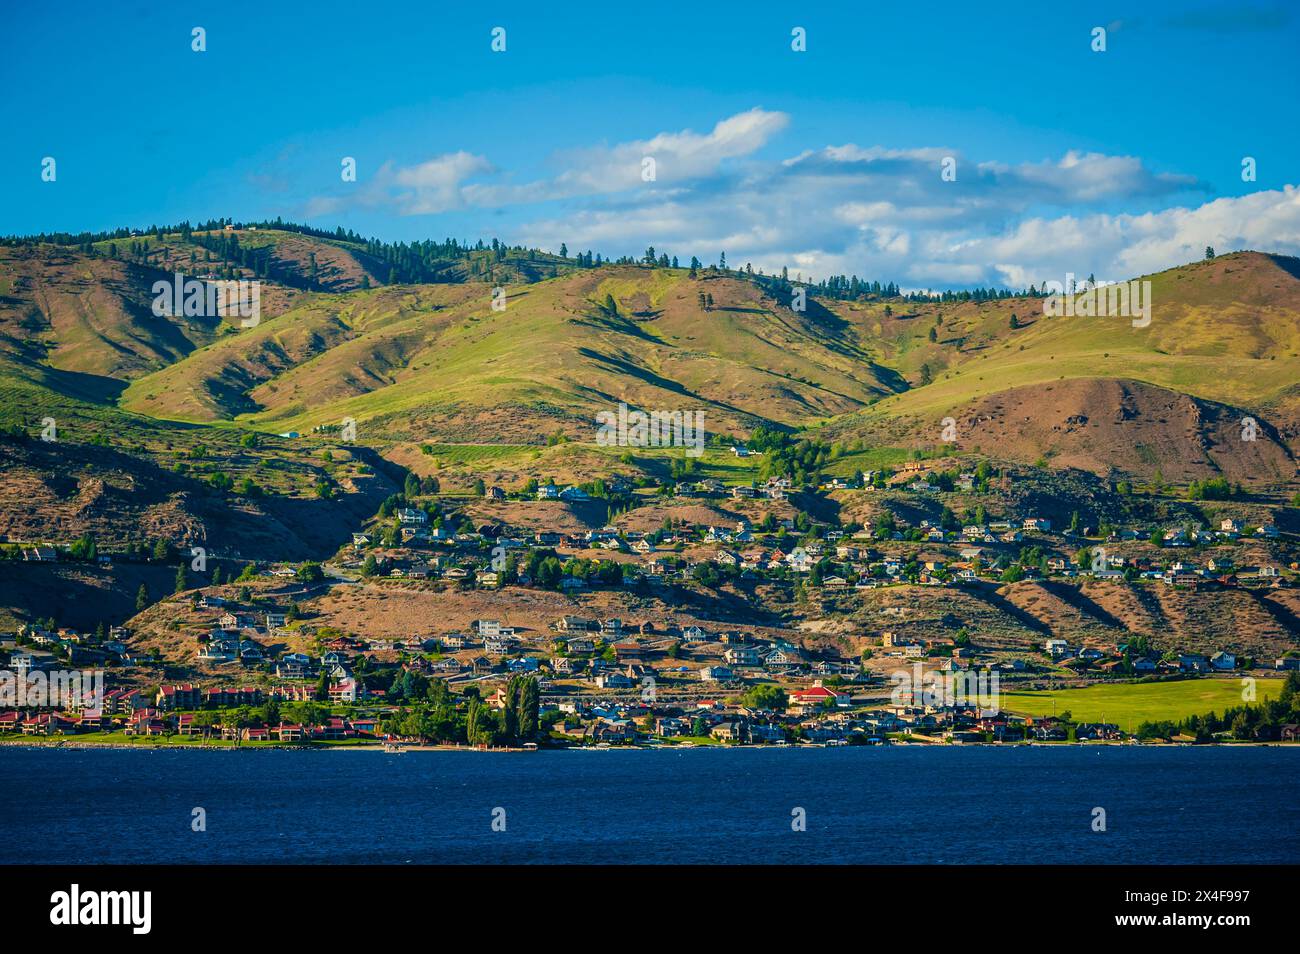 USA, Washington State, Lake Chelan. The view of Lake Chelan and the community from a winery. Stock Photo